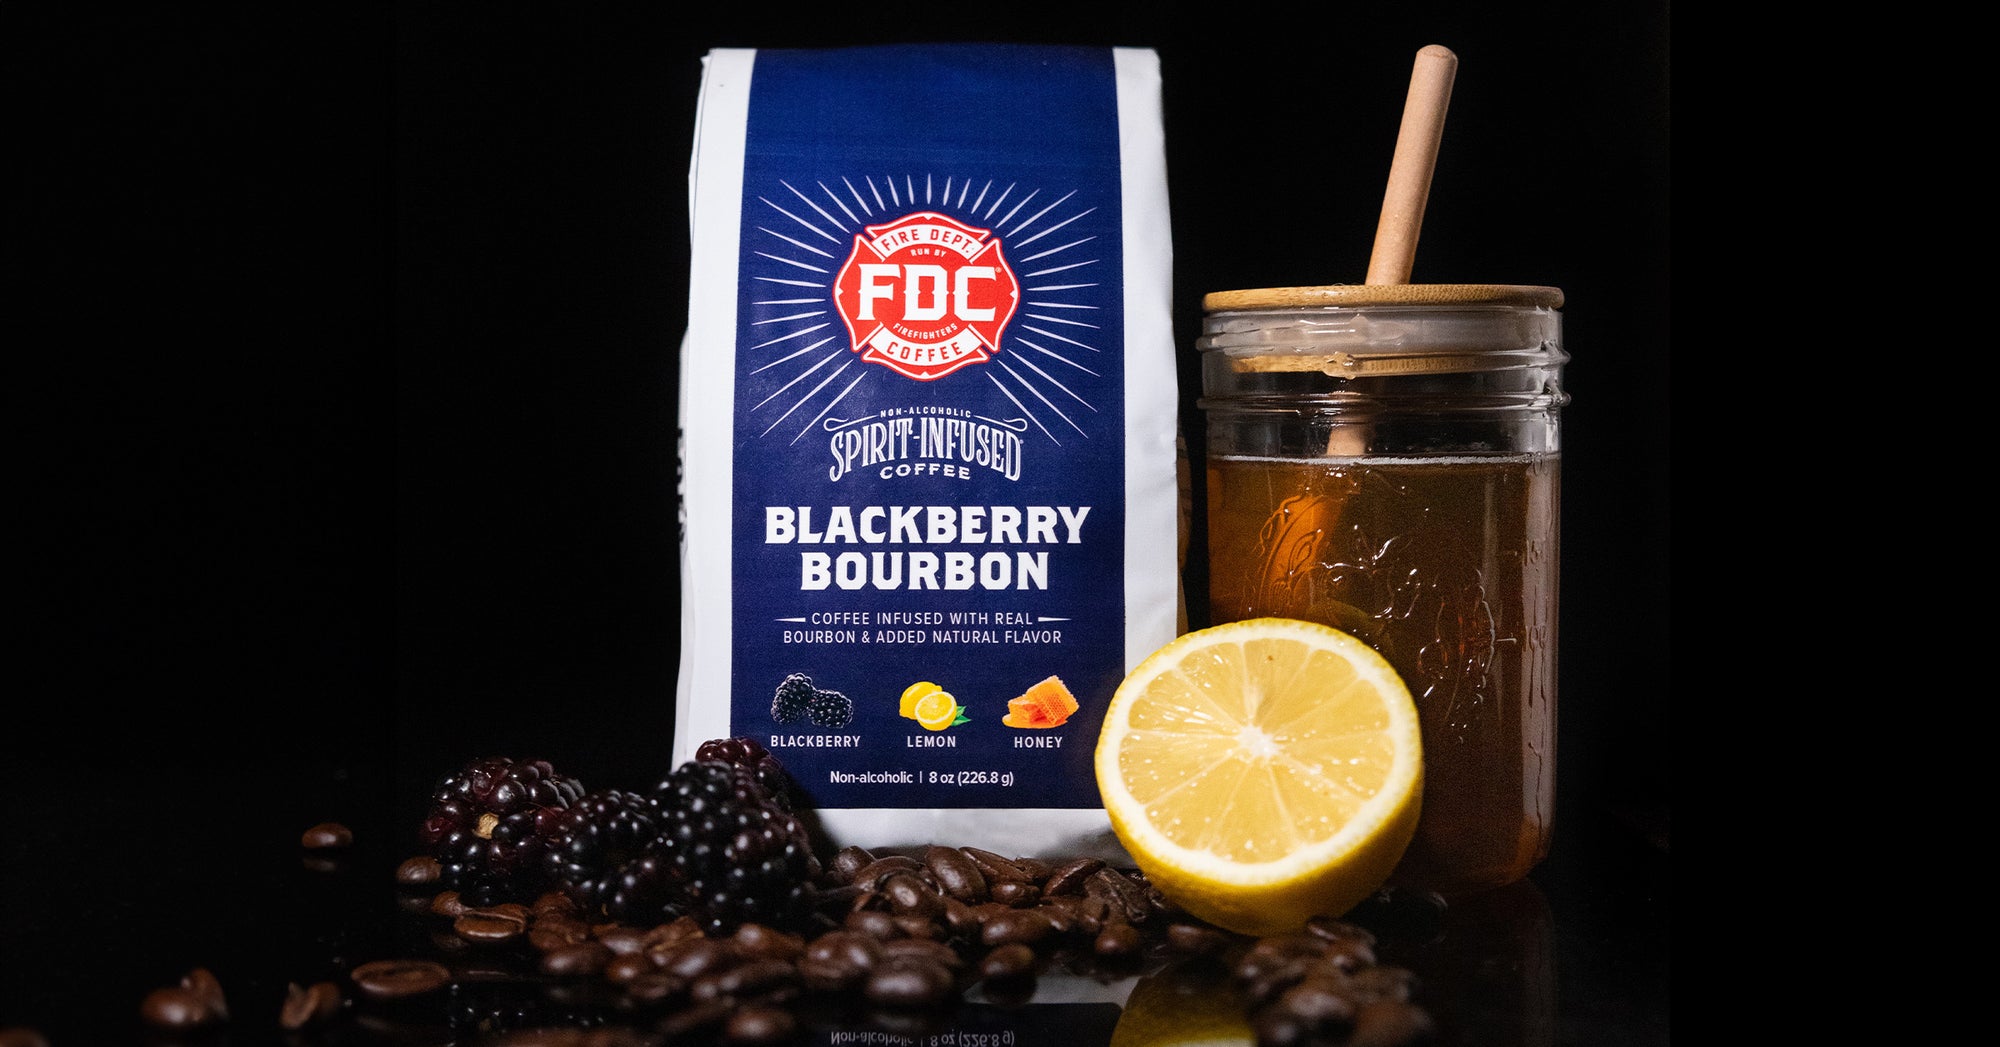 Blackberry Bourbon Infused Coffee featuring a blue bag with tasting notes of blackberry, honey and lemon.